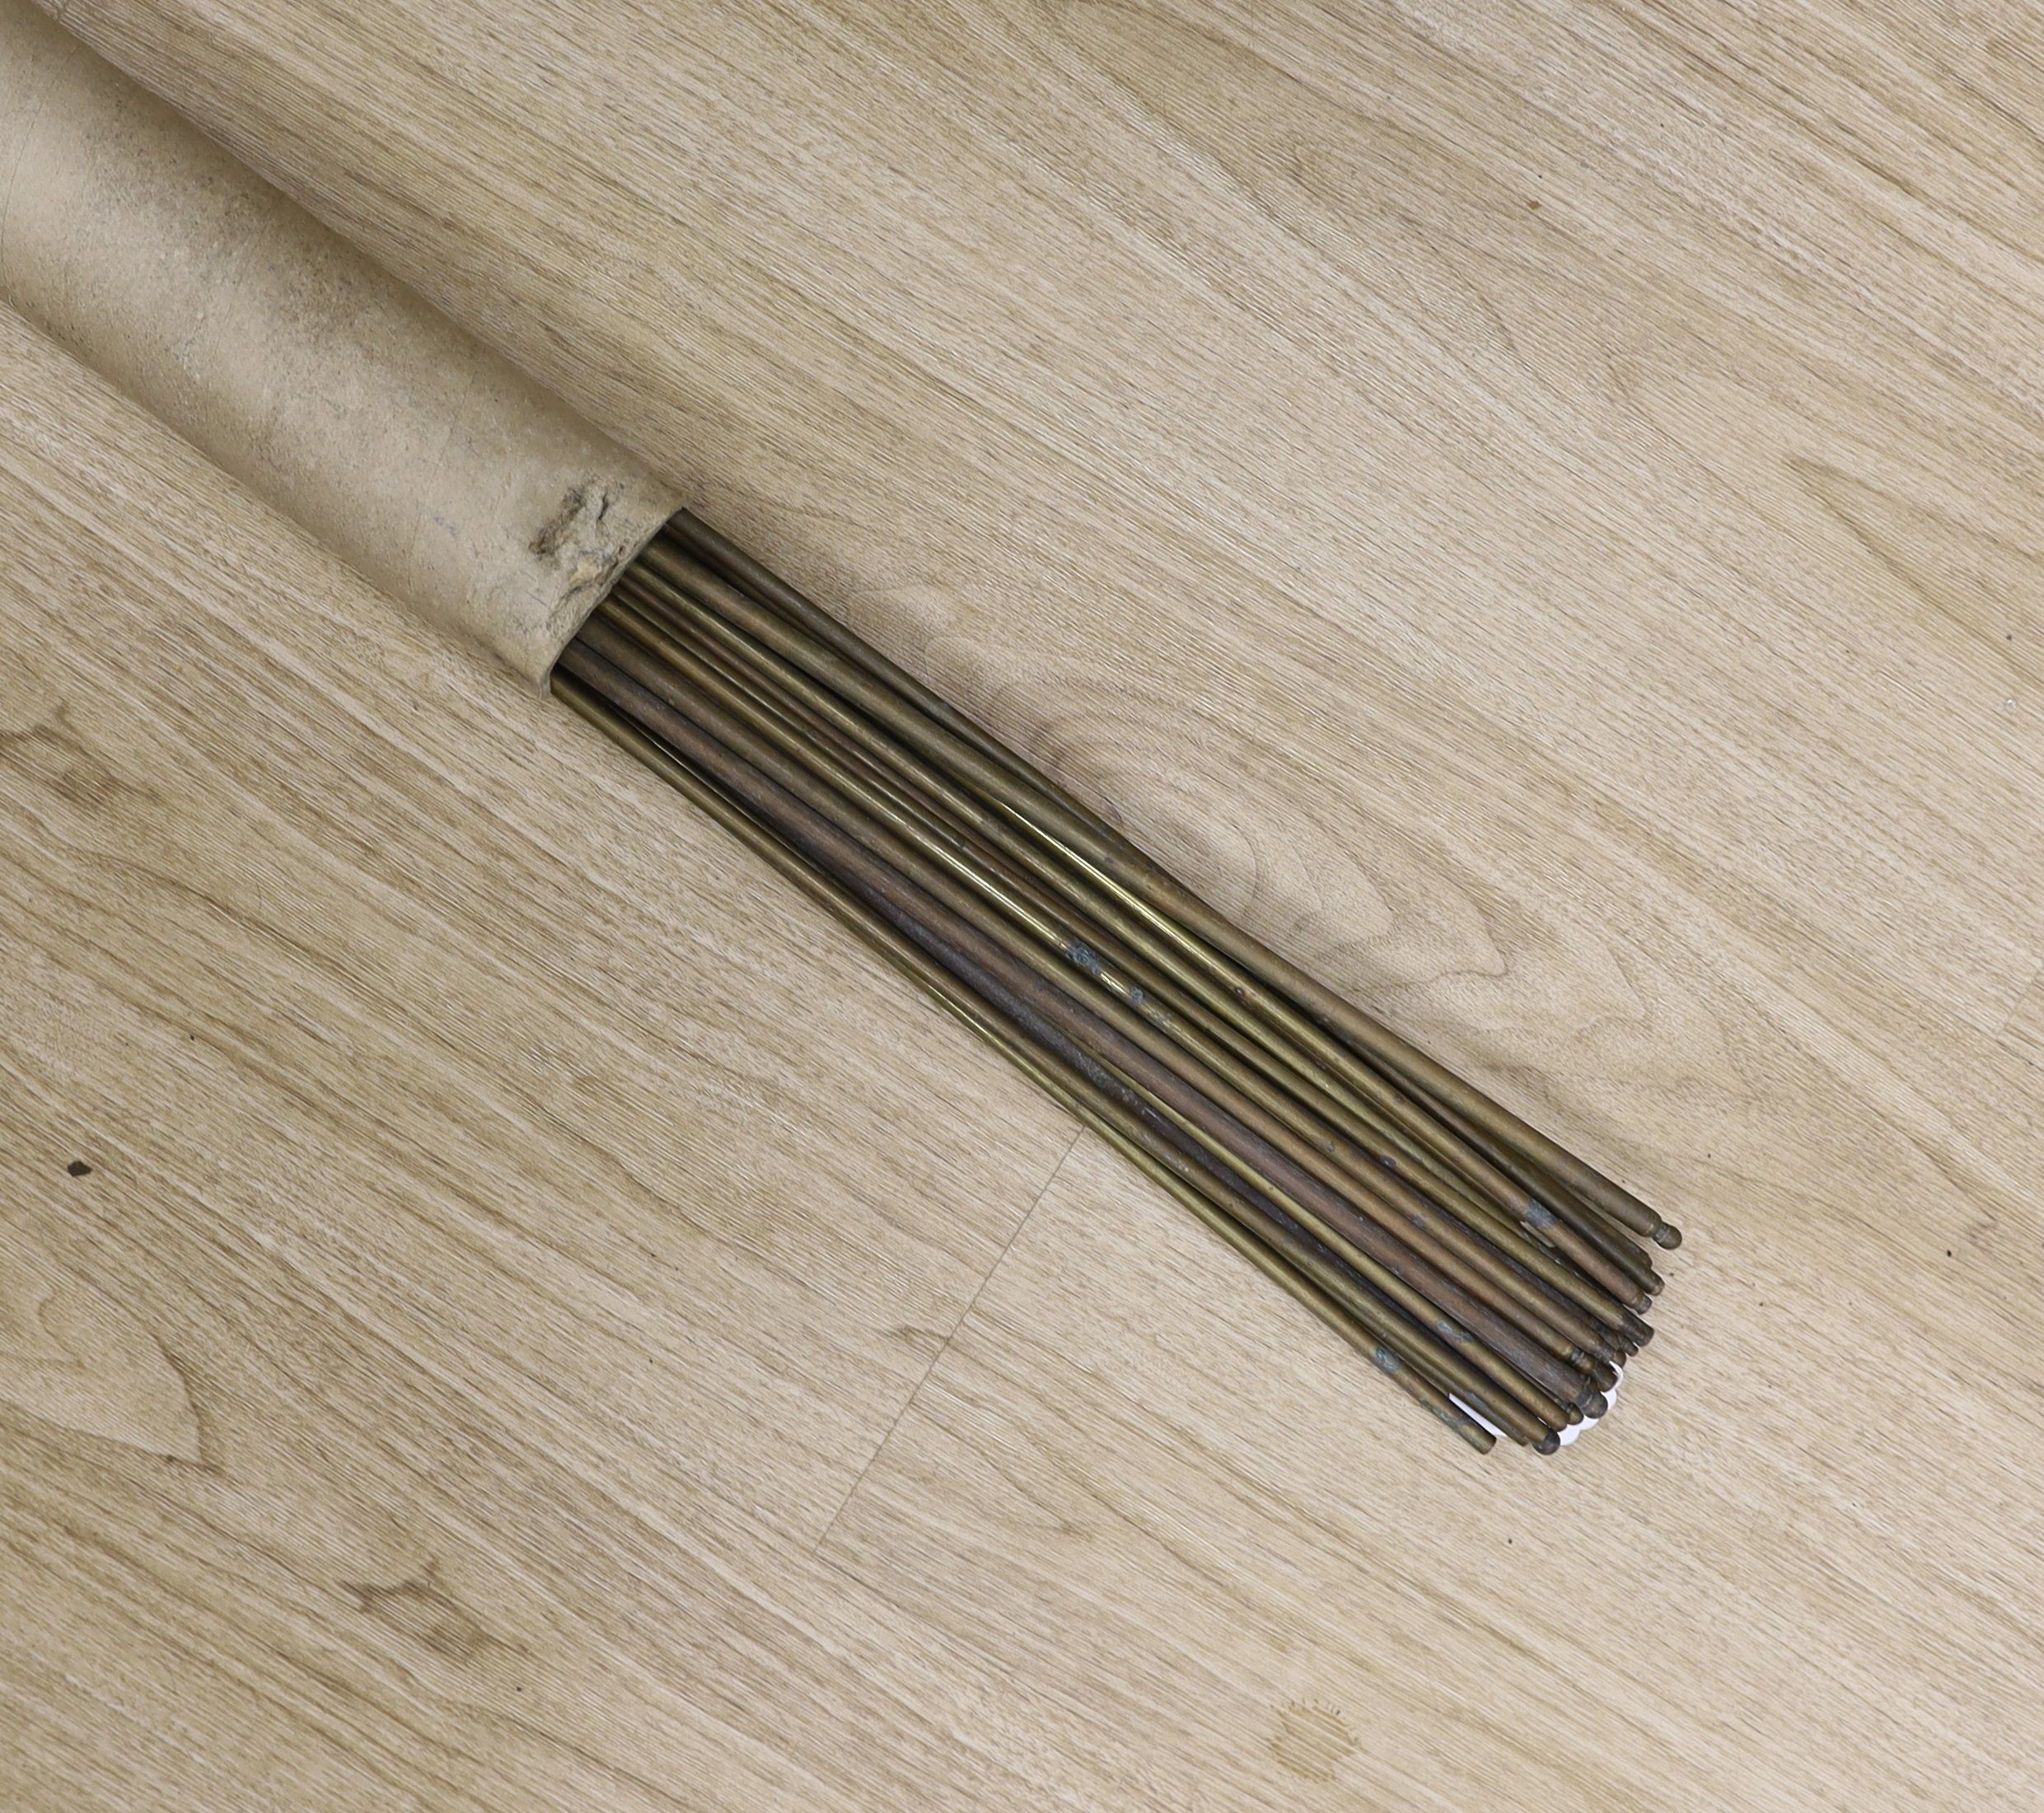 A quantity of Stair rods